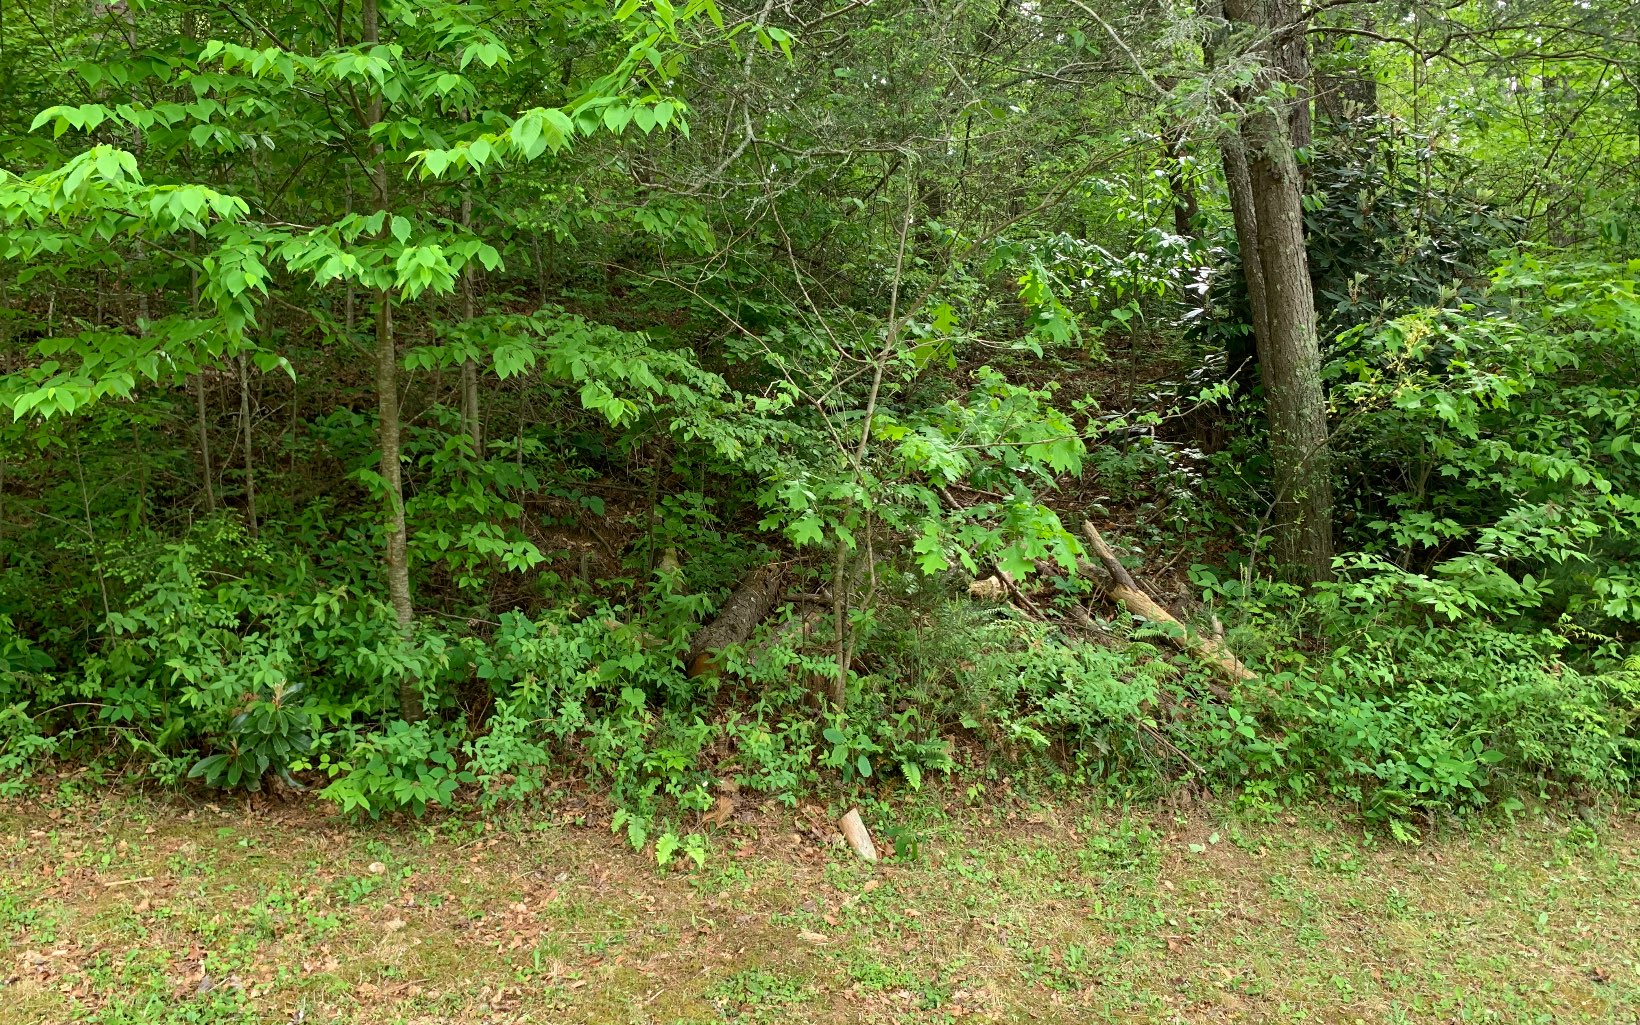 GREAT LOT IN THE NORTH GA MOUNTAINS. PERFECT PLACE TO BUILD YOUR MOUNTAIN GETAWAY! Located in an upscale community with wide paved roads, a pavilion with outdoor fireplace, this .89 of an acre lot offers nice mountain views.